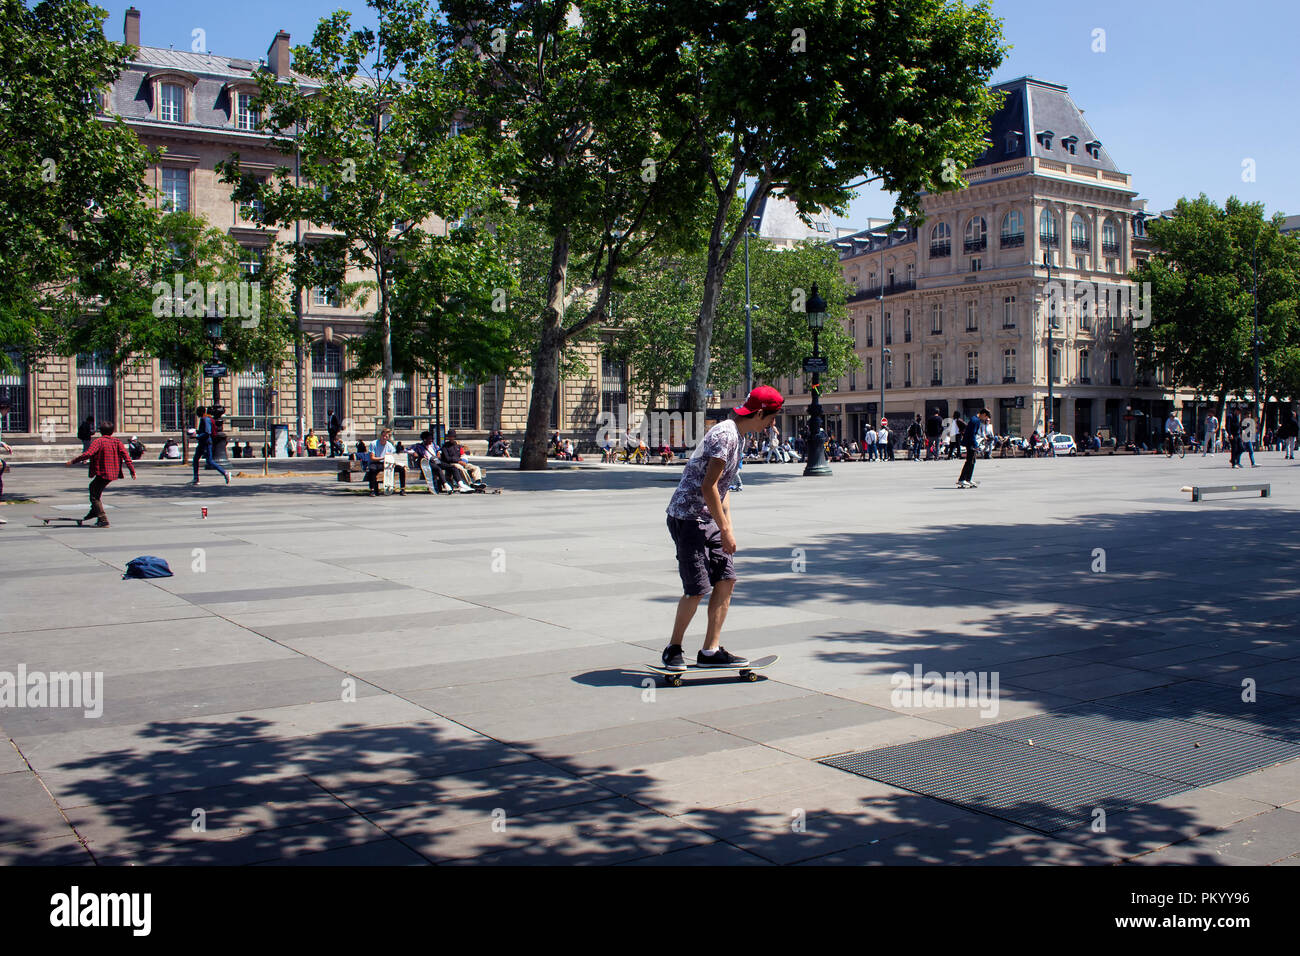 Young people skate at Republic square (Place de la Republique) in Paris. The image shows the youth culture of the city. Stock Photo